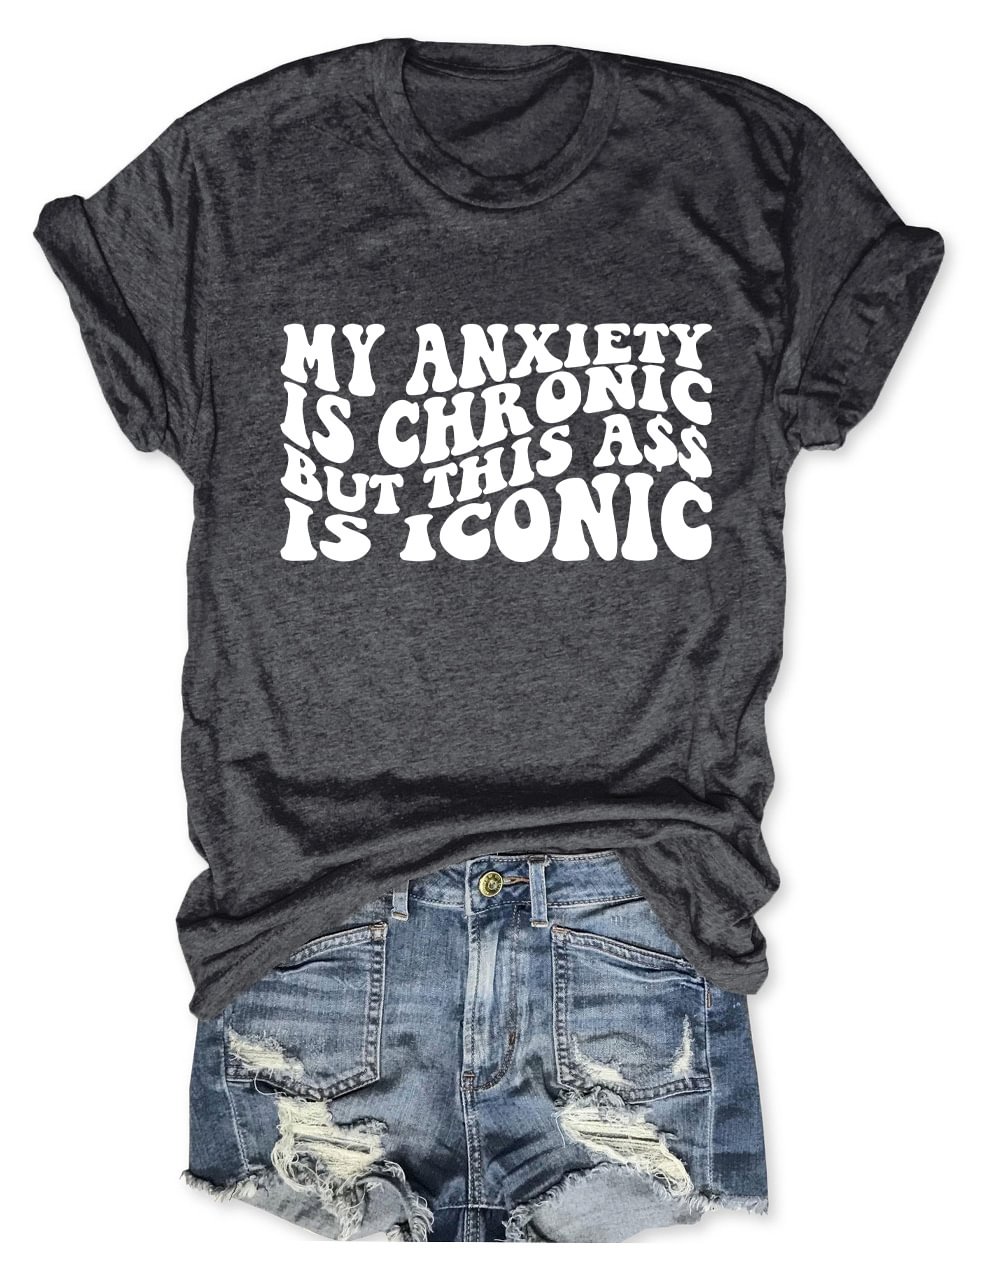 My Anxiety is Chronic But This Ass Is Iconic T-Shirt